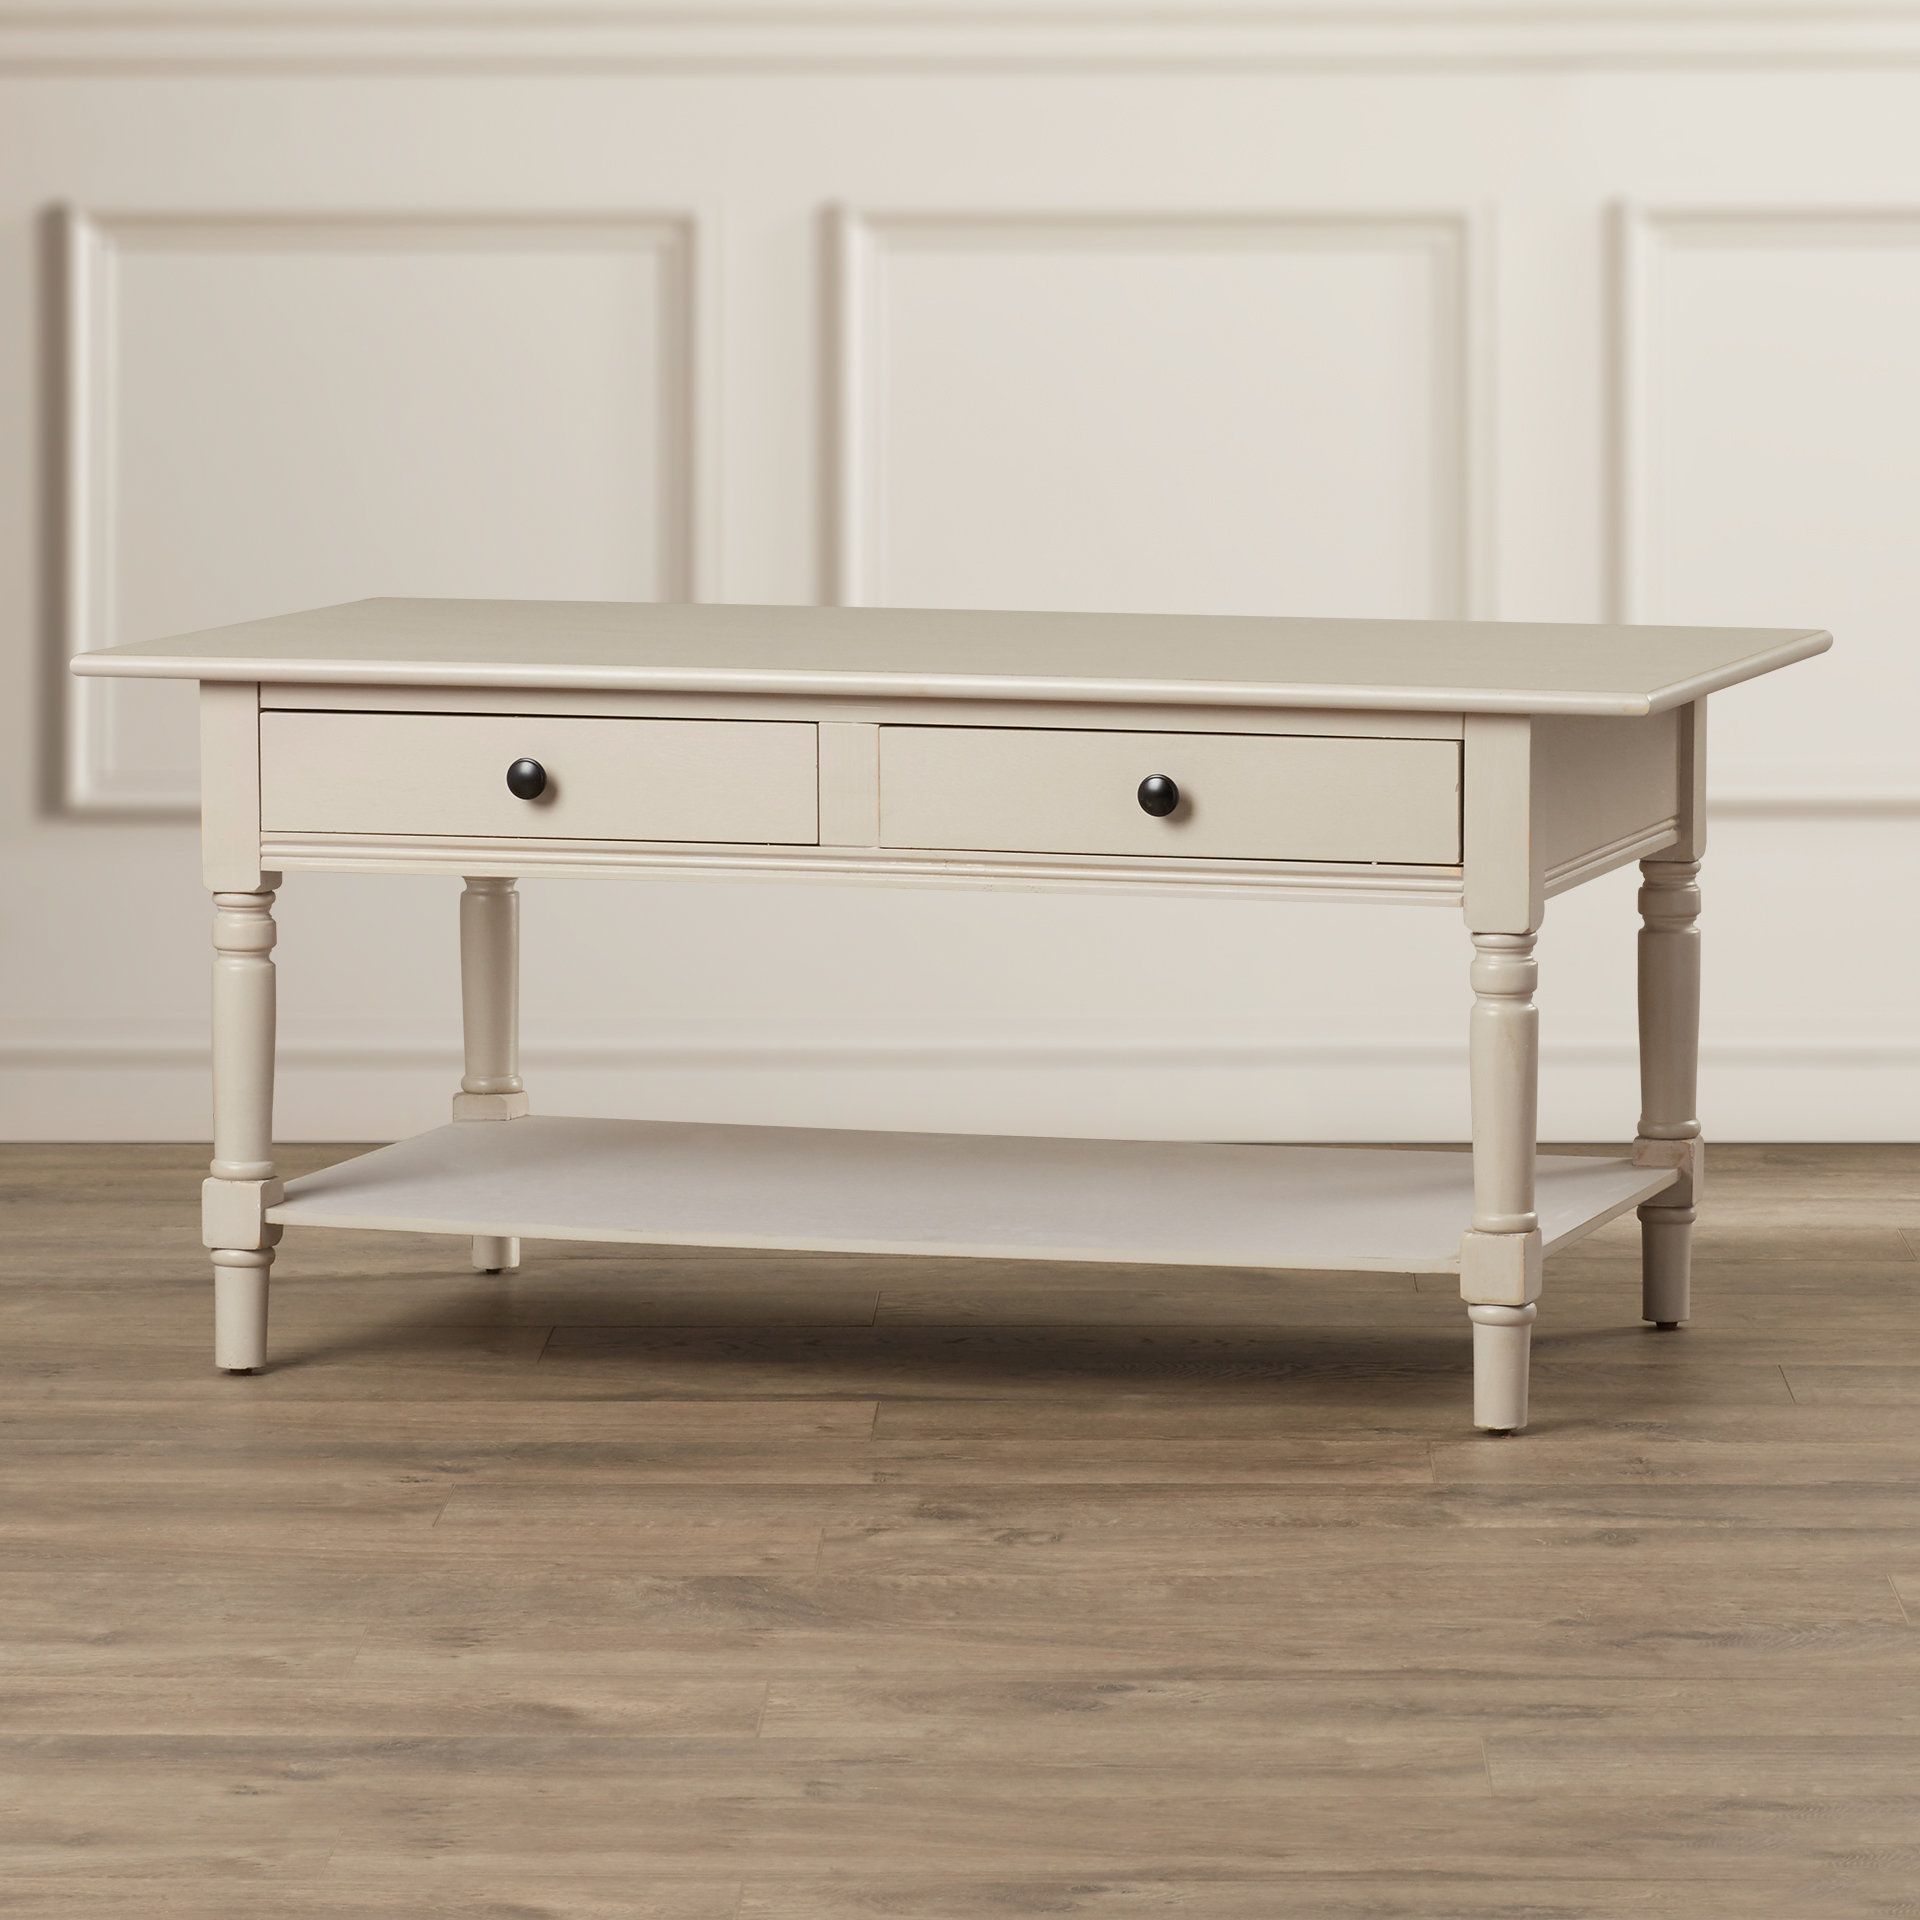 Grey Coffee Tables You'll Love | Wayfair With Regard To Layered Wood Small Square Console Tables (View 7 of 30)